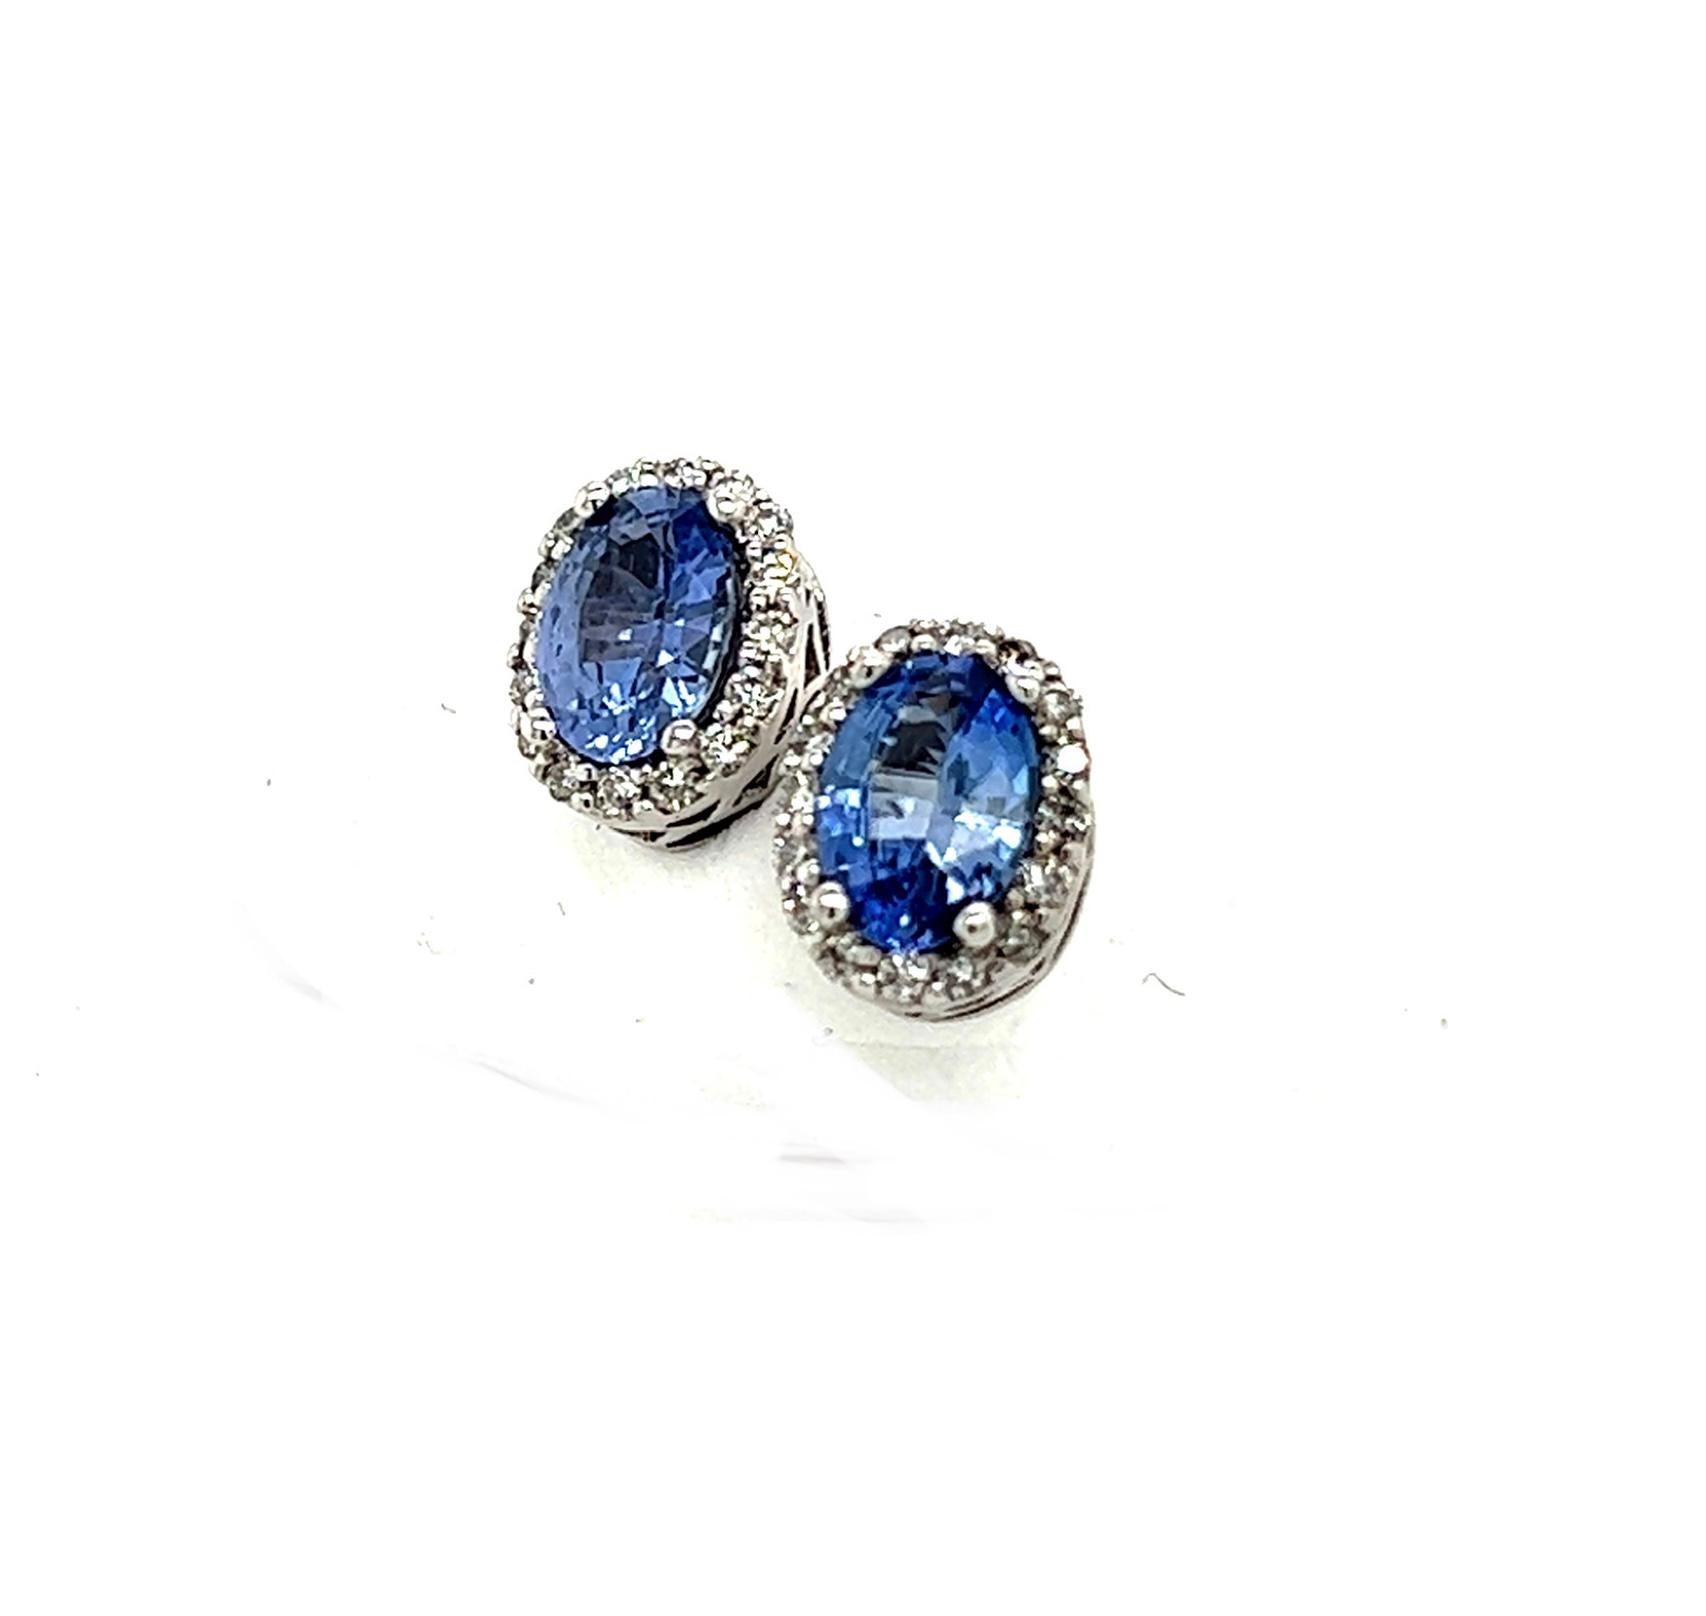 Natural Sapphire Diamond Earrings 14k Gold 1.73 TCW Certified $3,950 121272

Nothing says, “I Love you” more than Diamonds and Pearls!

These Sapphire earrings have been Certified, Inspected, and Appraised by Gemological Appraisal